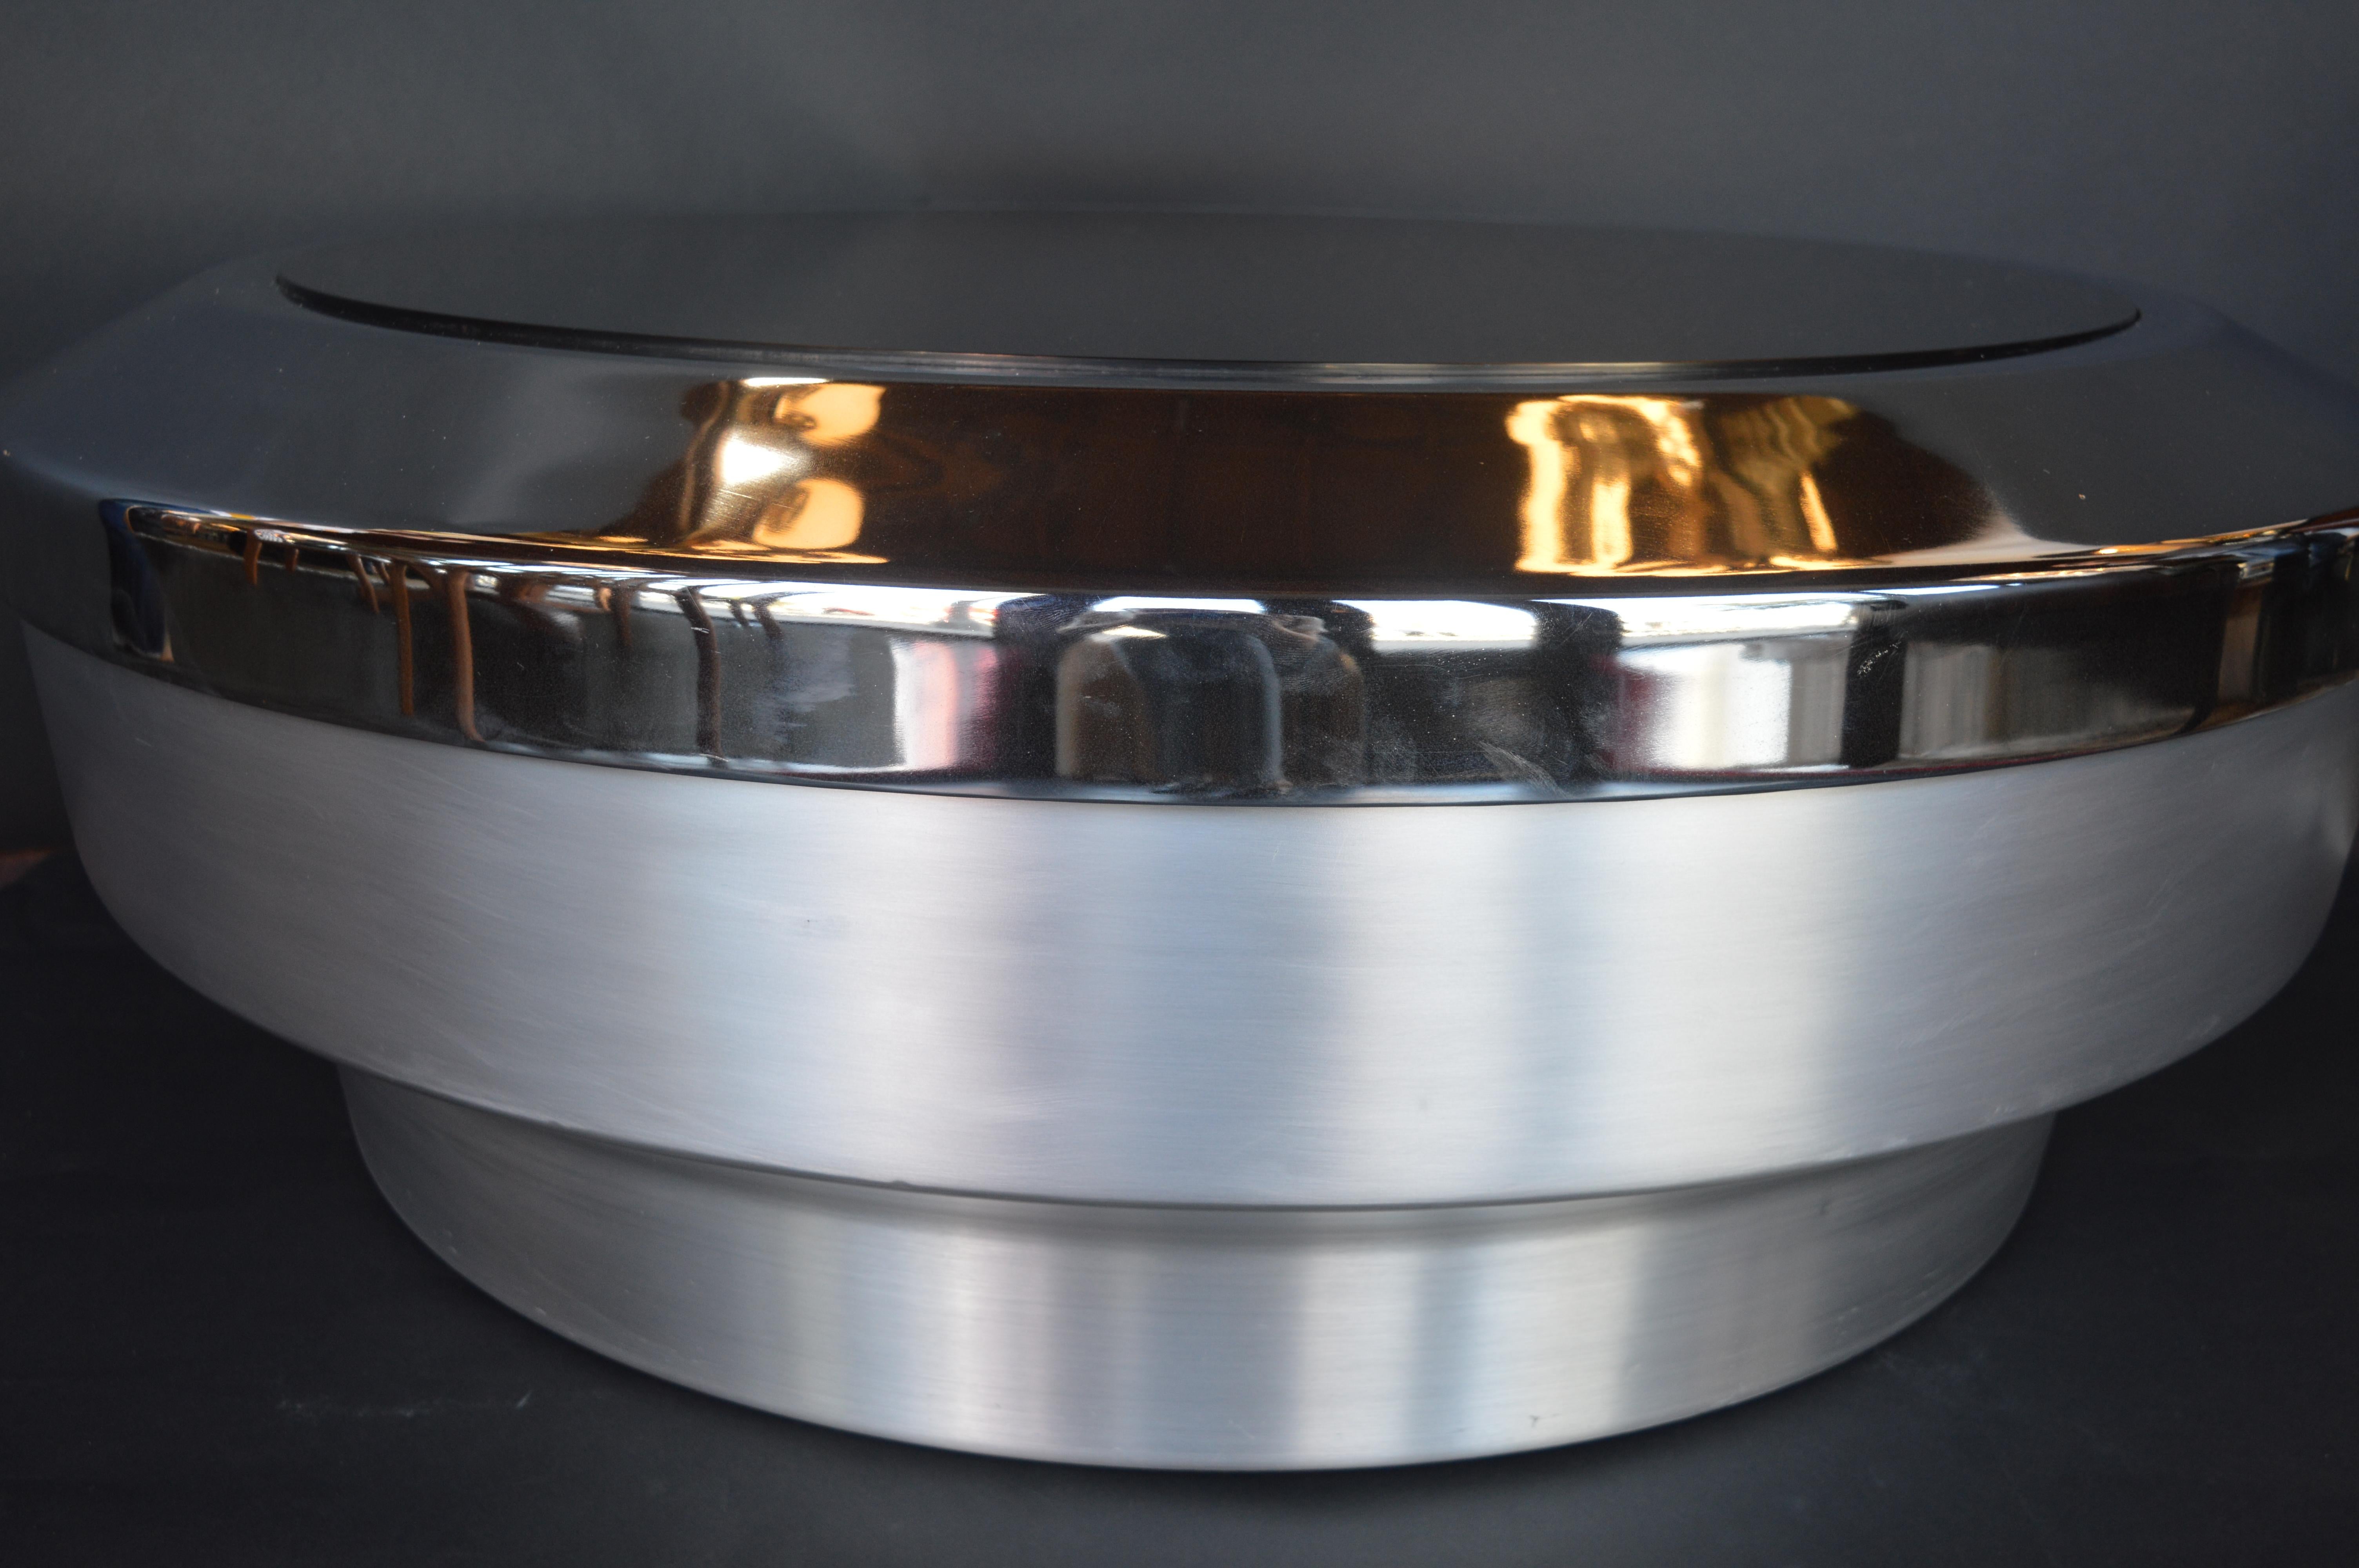 A stunning round, drum/canister coffee table designed by GJ Neville. This coffee table features a brushed chrome base and mirrored top. The top of this table lifts off the base to reveal a canister hollow middle which can be used for storage.